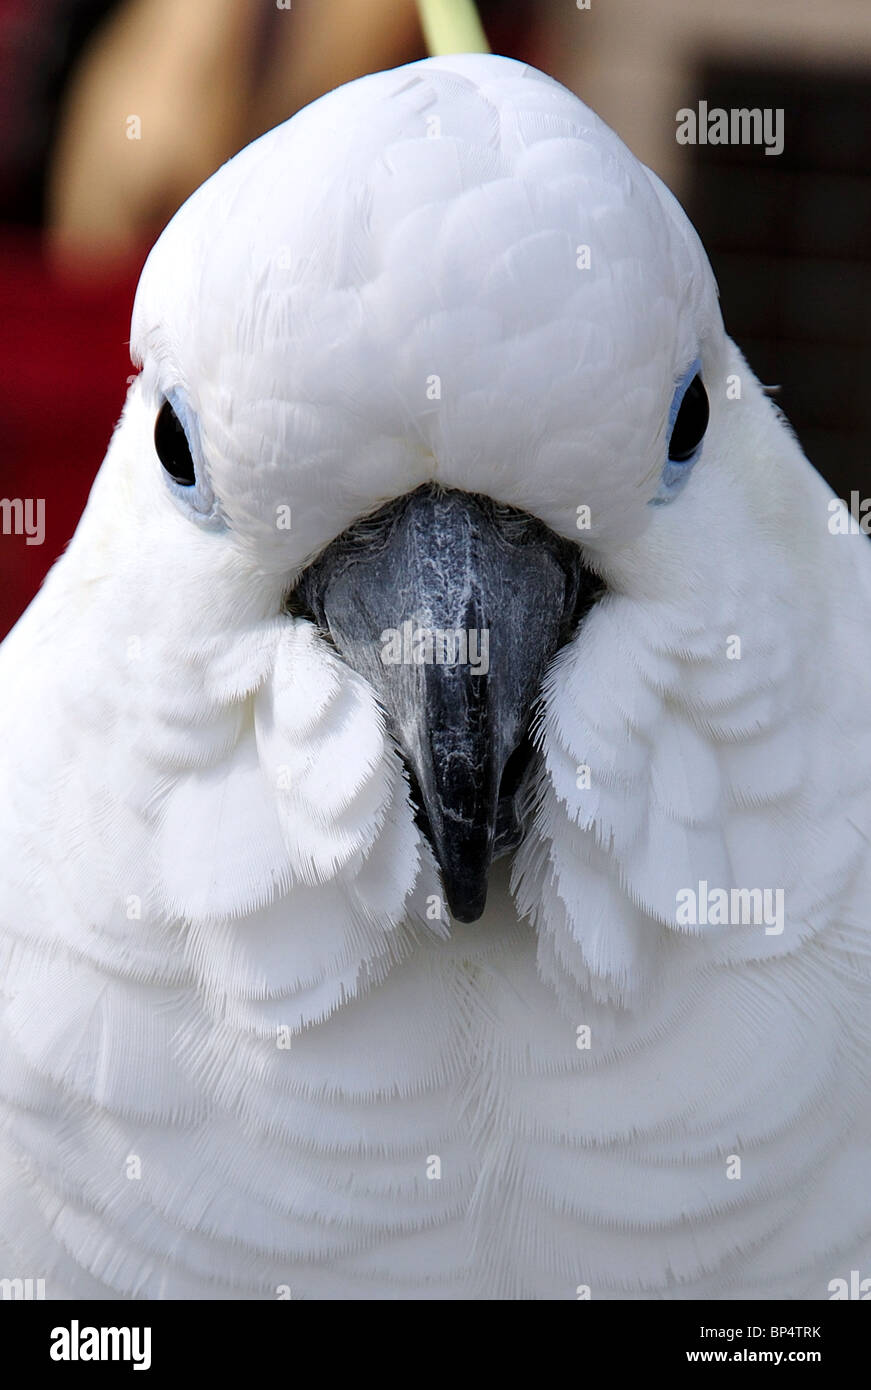 Sulphur-crested Cockatoo on market stall, Visby, Gotland County, Gotland Province, Kingdom of Sweden Stock Photo